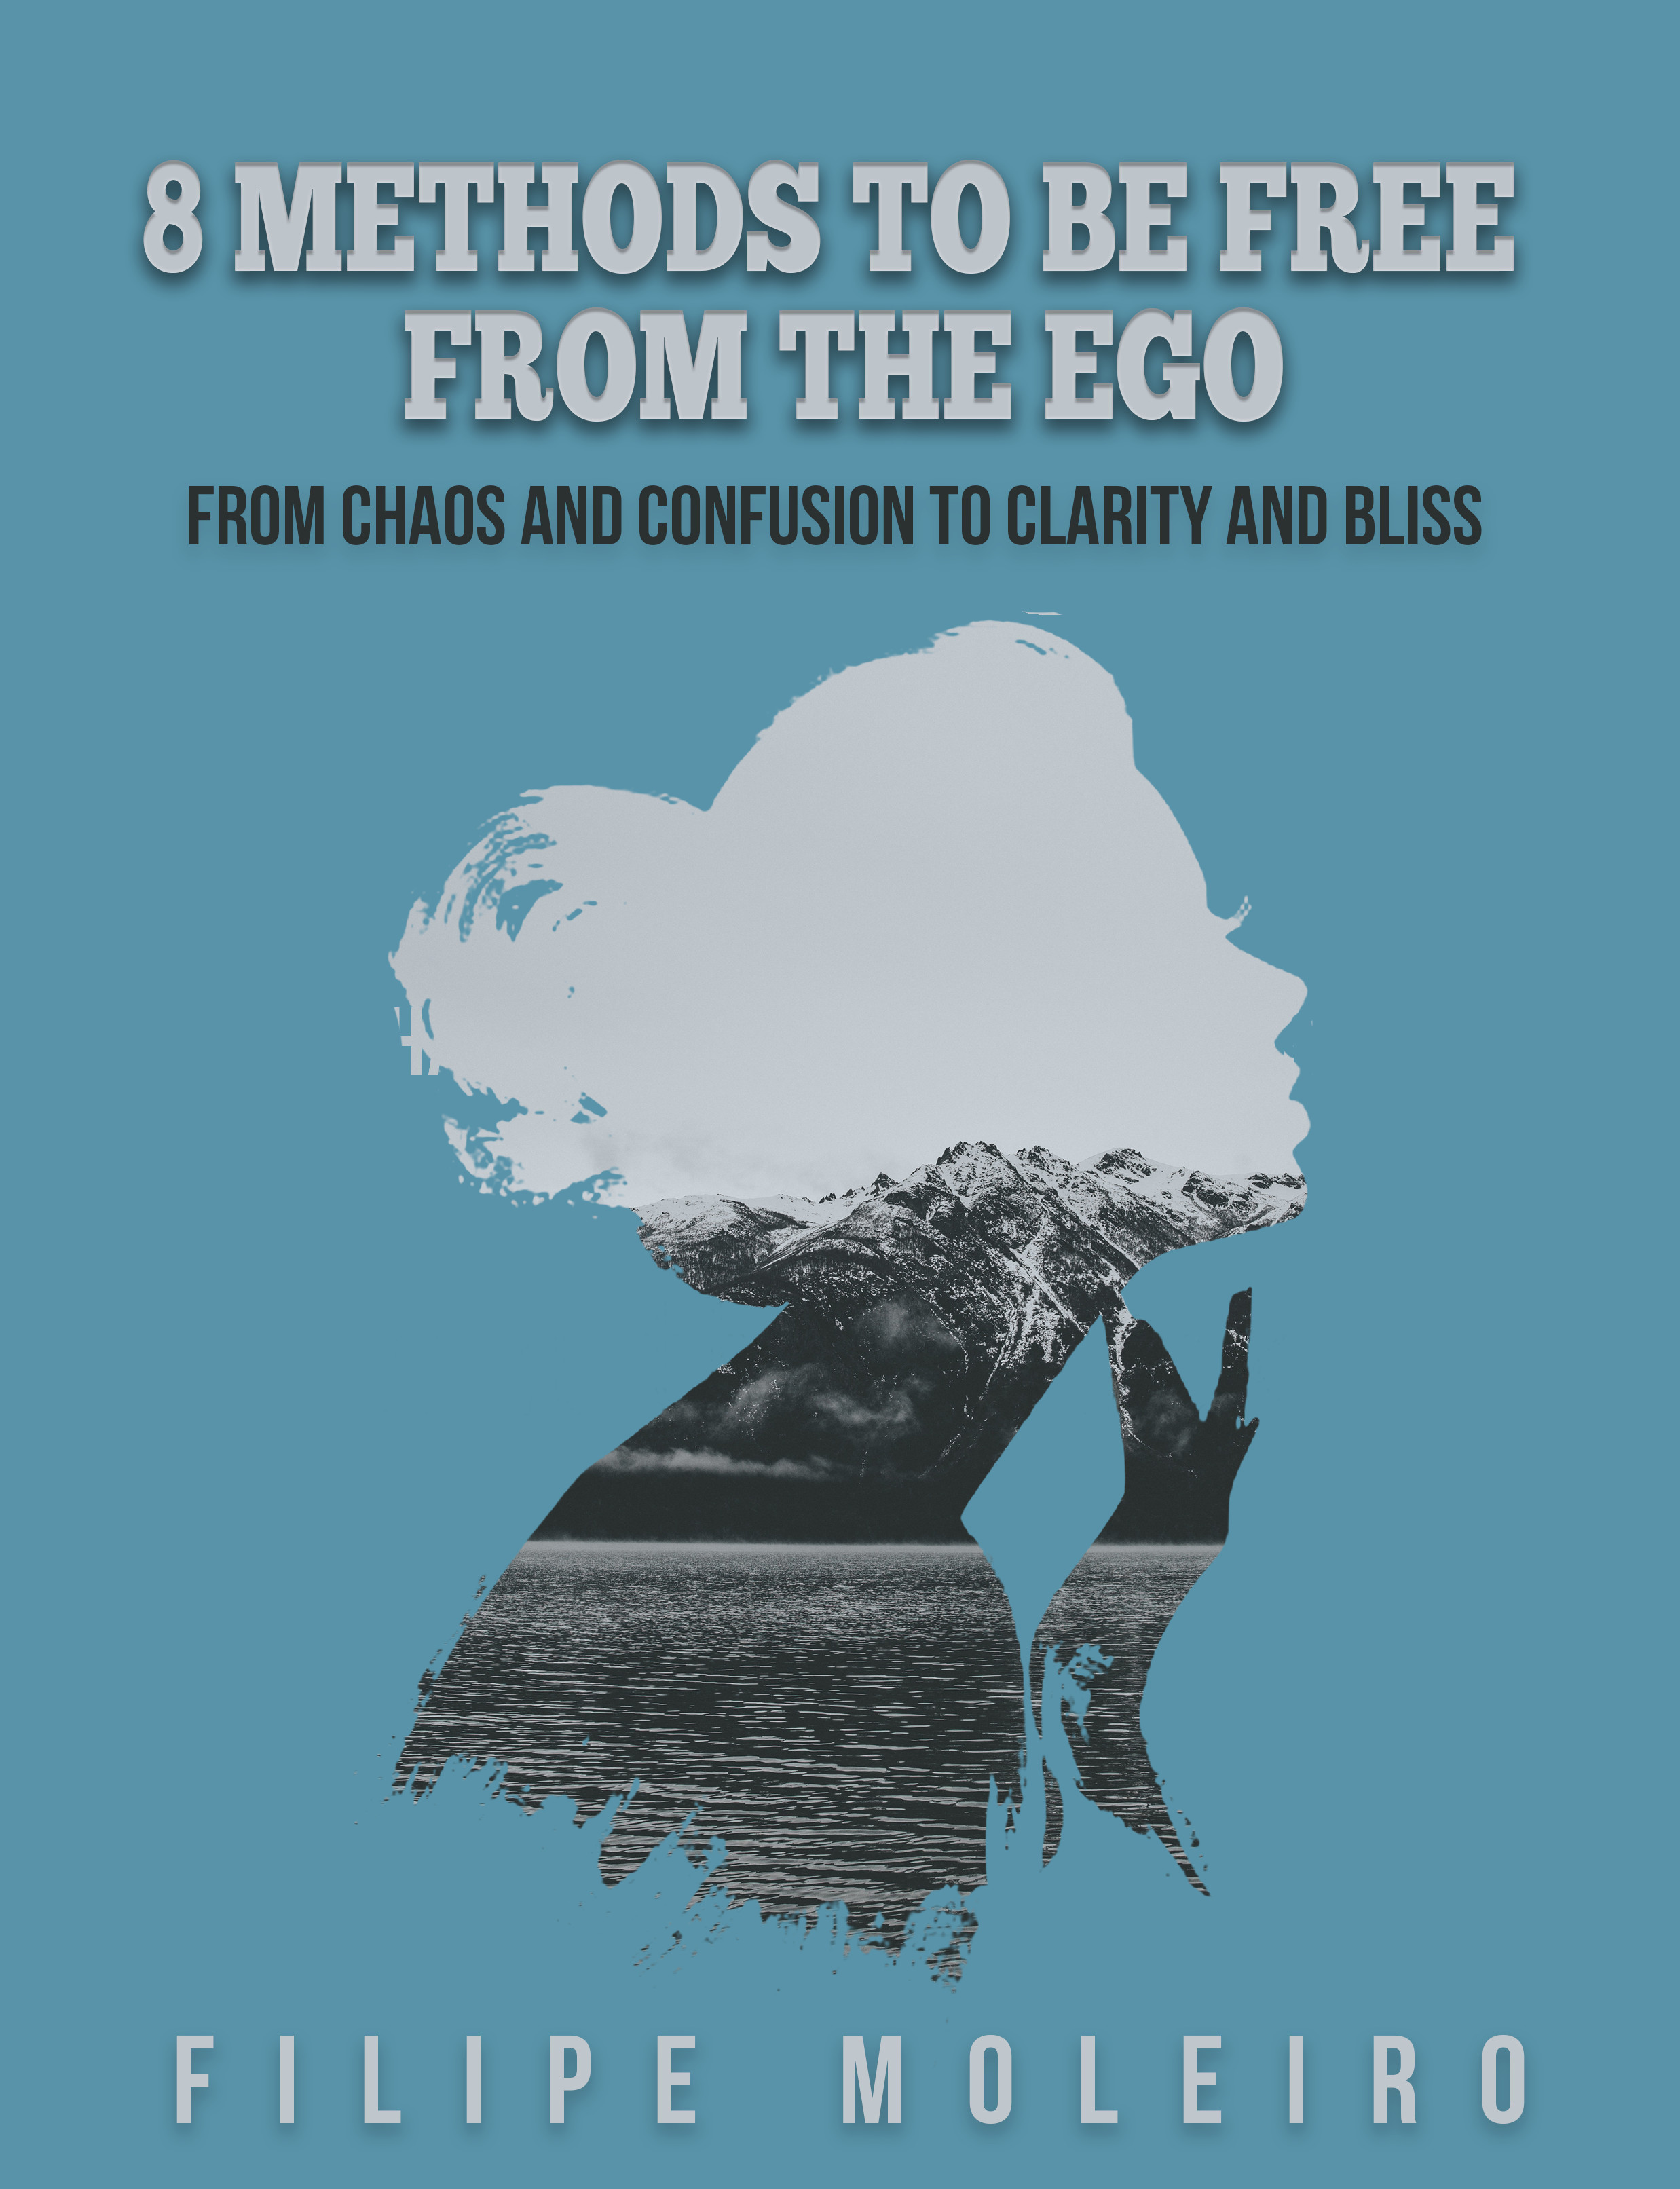 FREE: 8 Methods to Be Free from the Ego by Filipe Moleiro